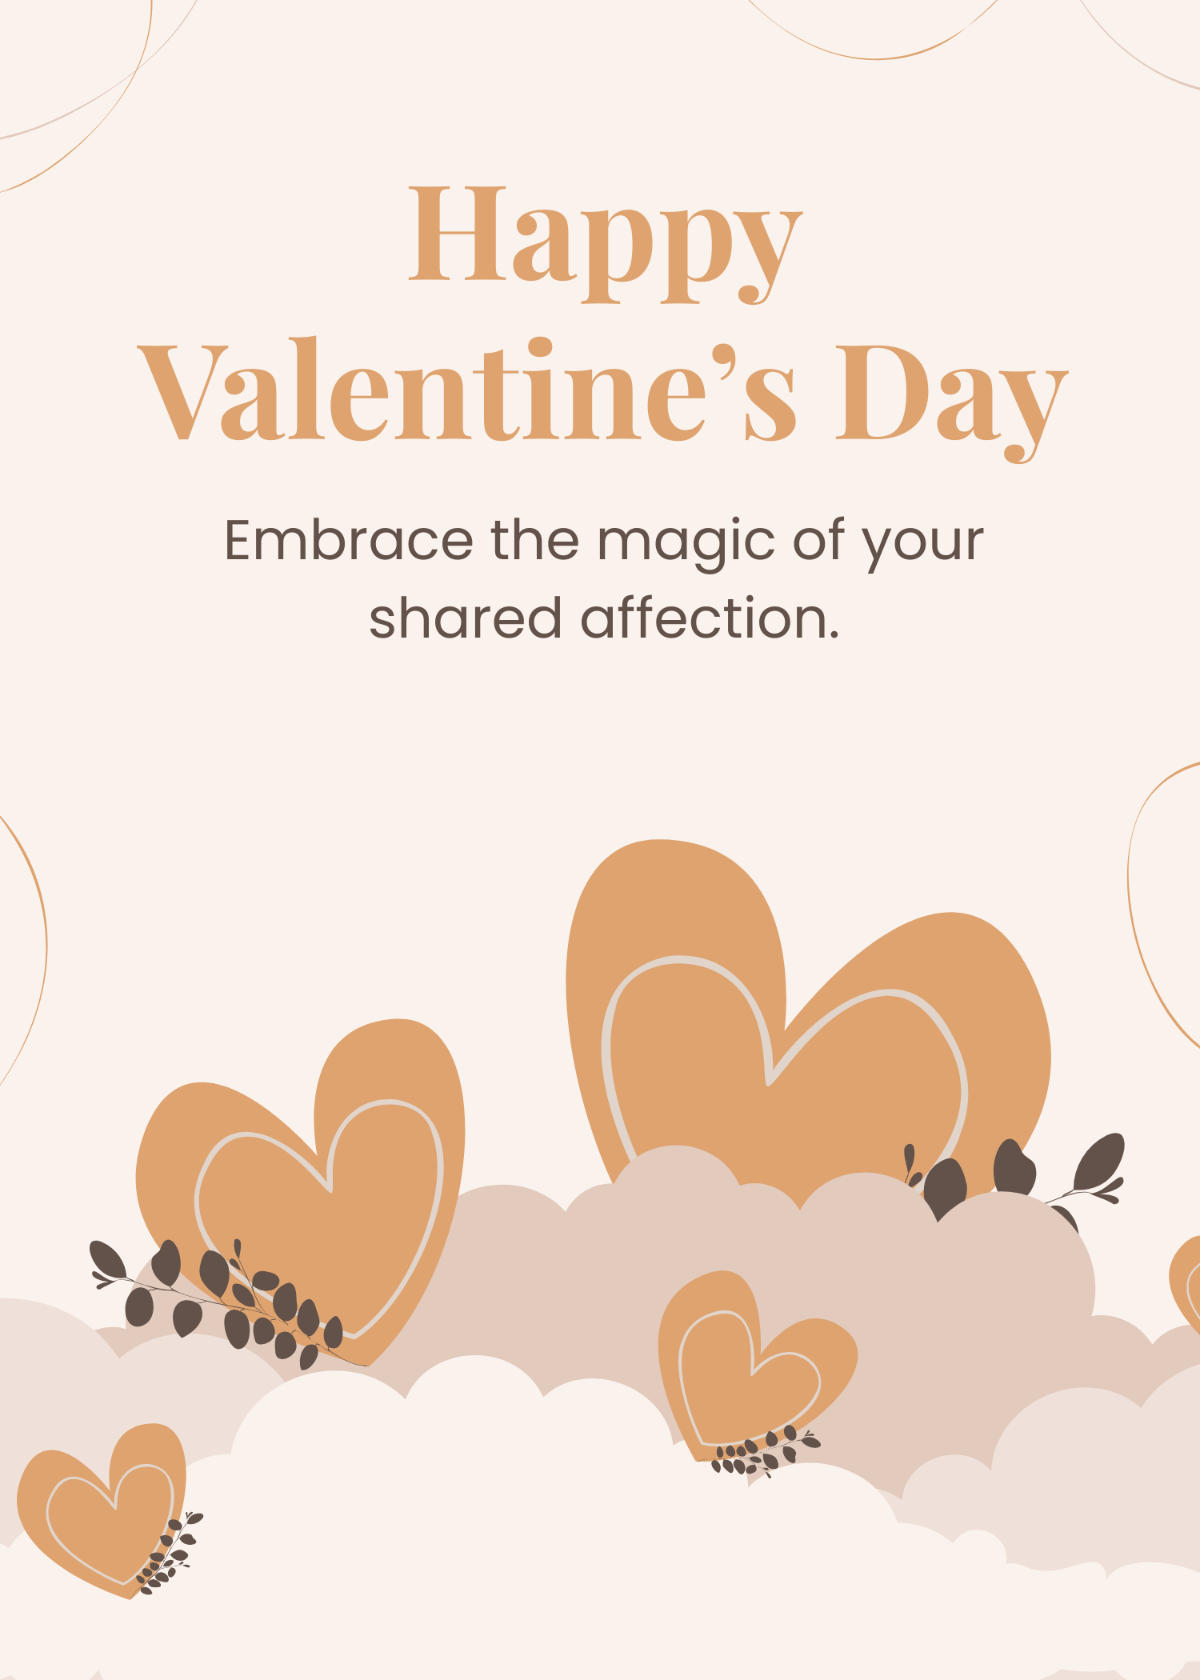 Valentines Greeting Card Template